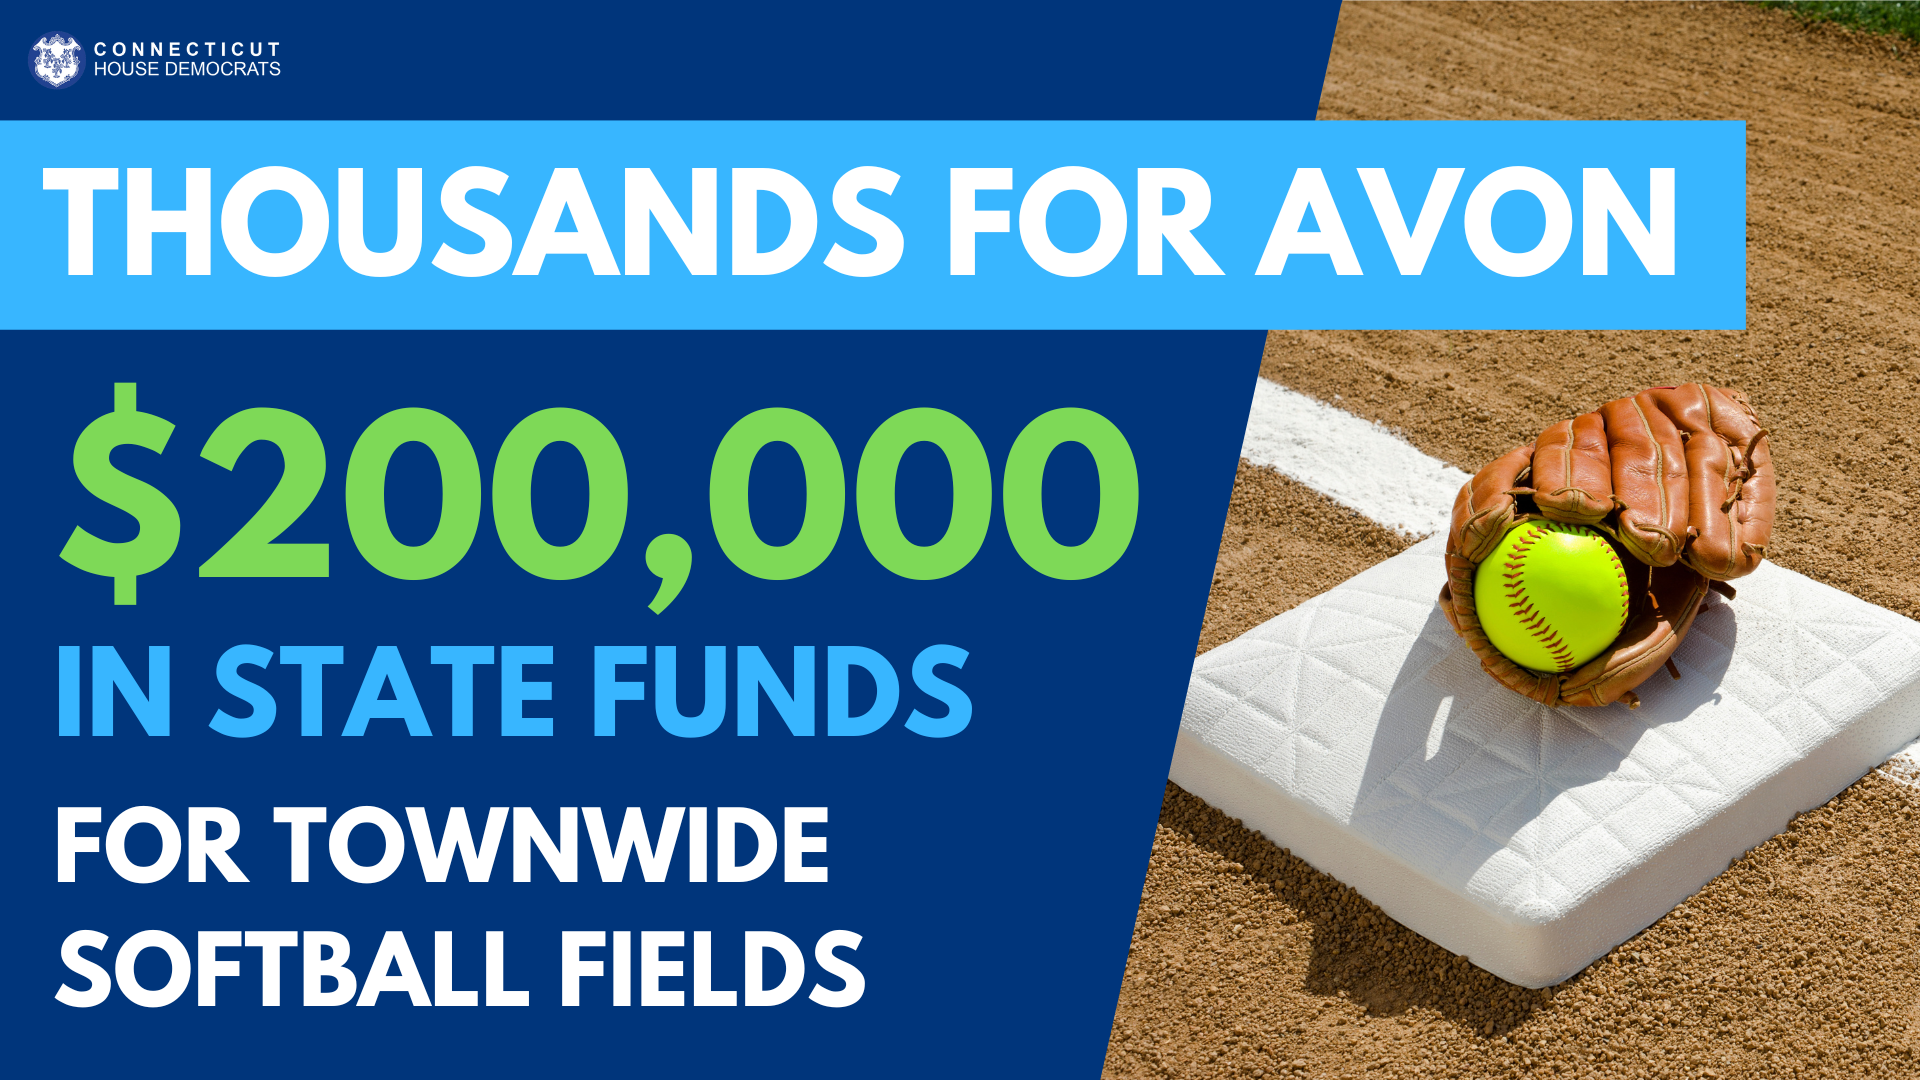 Funds are coming to Avon for softball fields